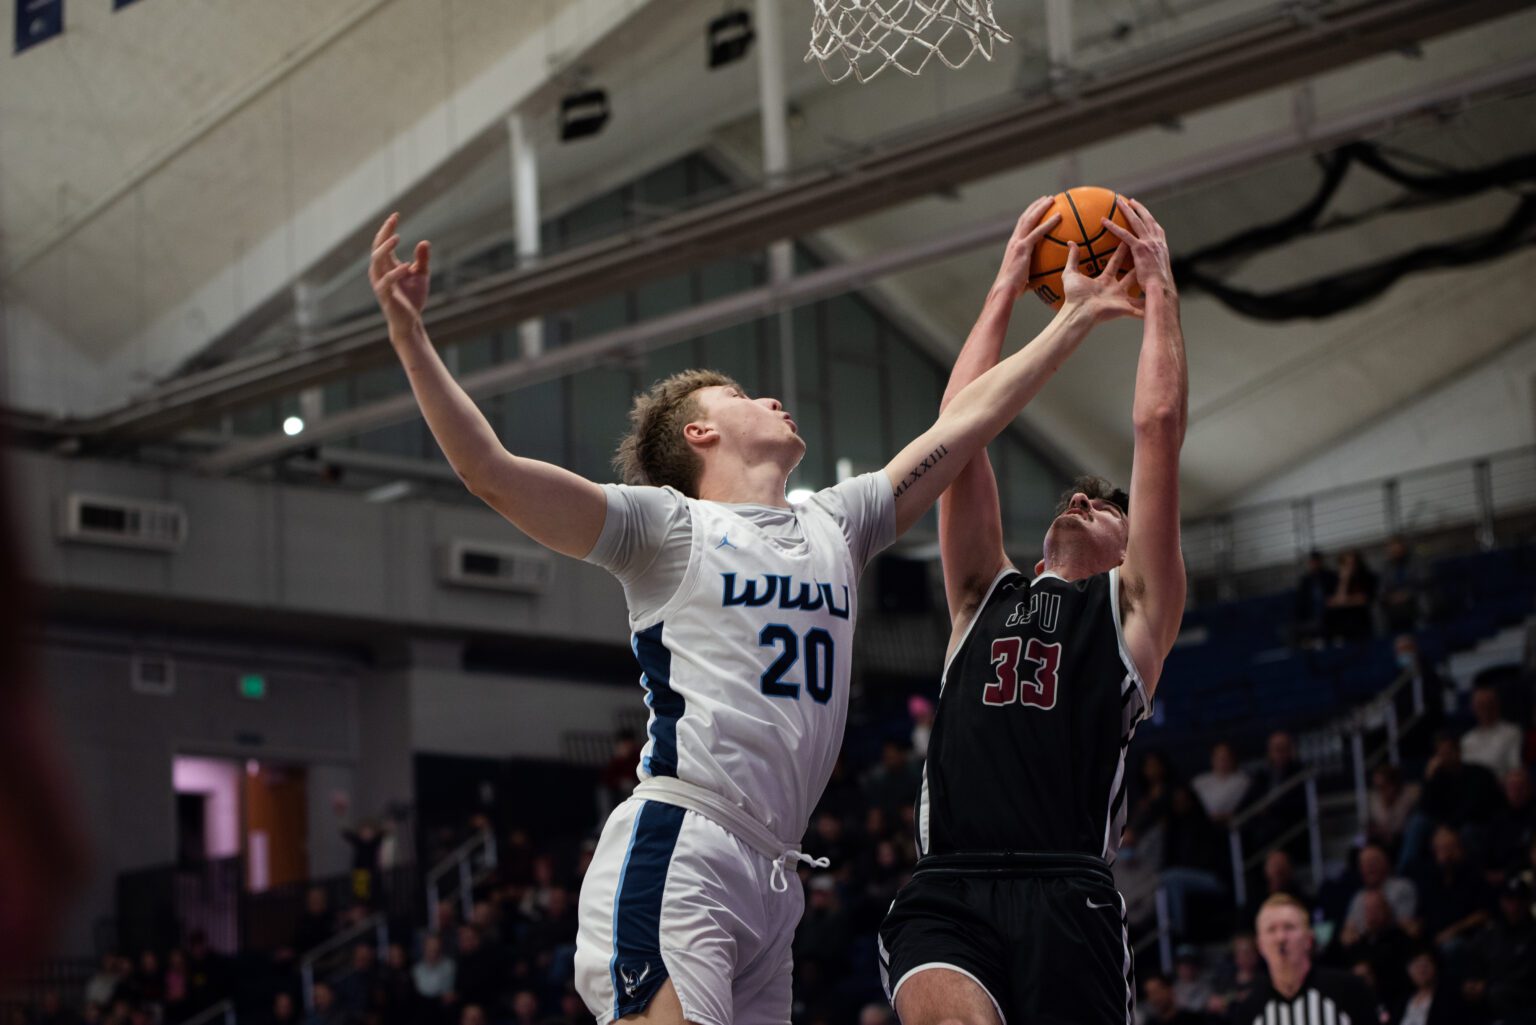 Western sophomore forward Nic Welp battles for a rebound during a 90-73 loss against Seattle Pacific University on Jan. 7.